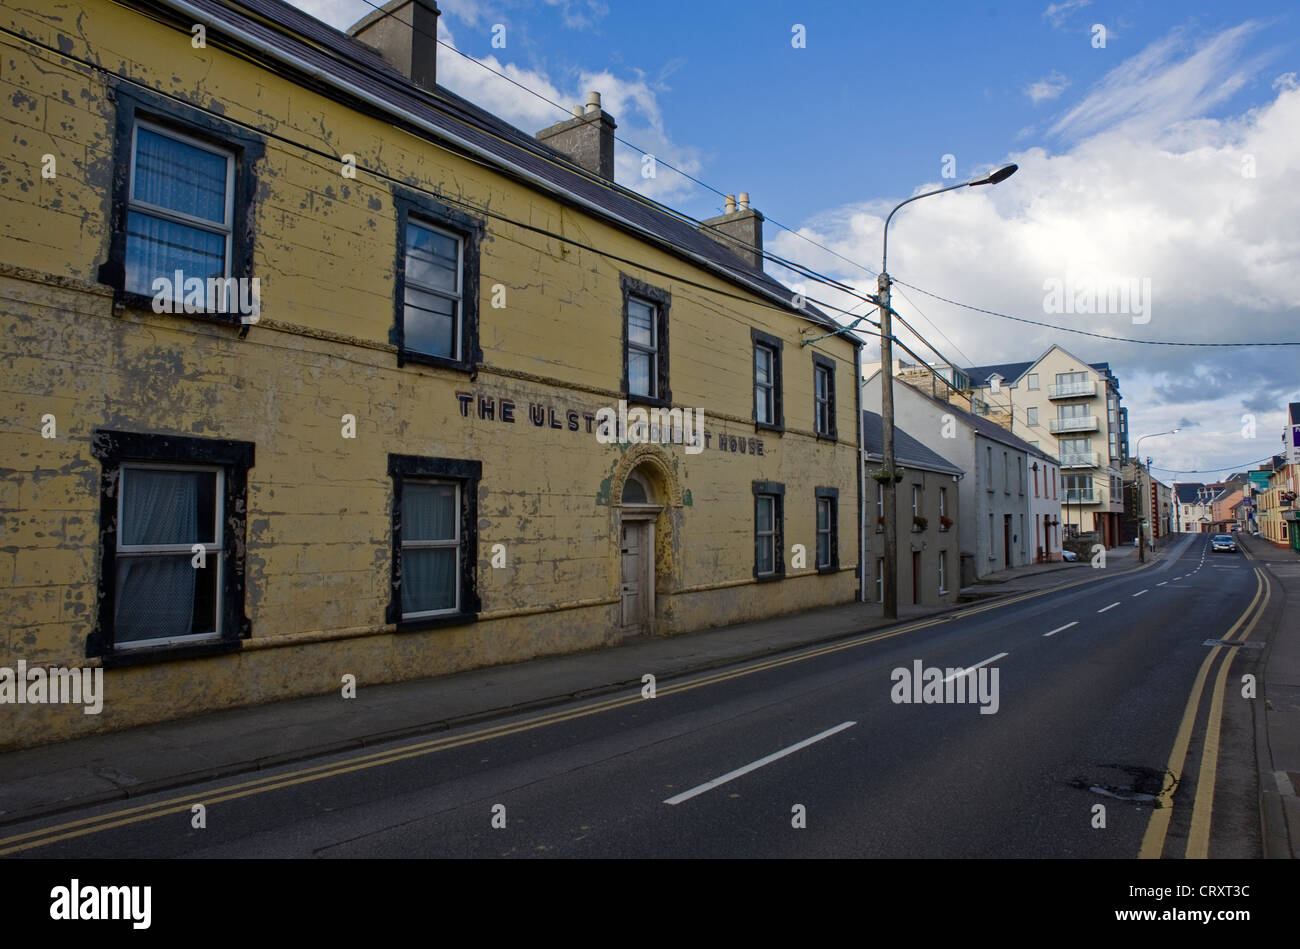 The Ulster Tourist House, West End, Bundoran, County Donegal. Stock Photo